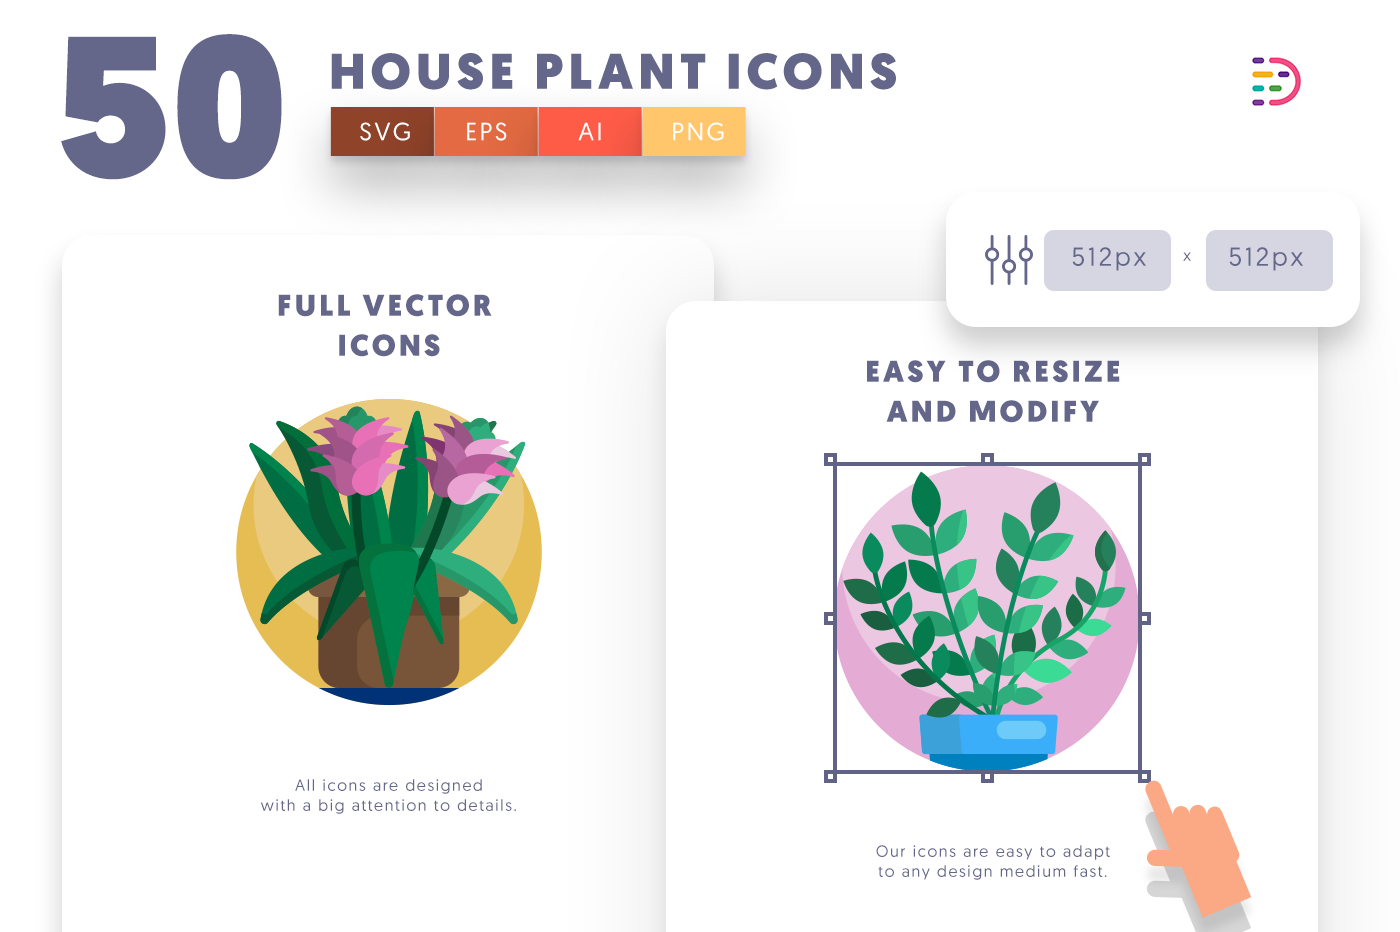 Customizable and vector 50 House Plant Icons